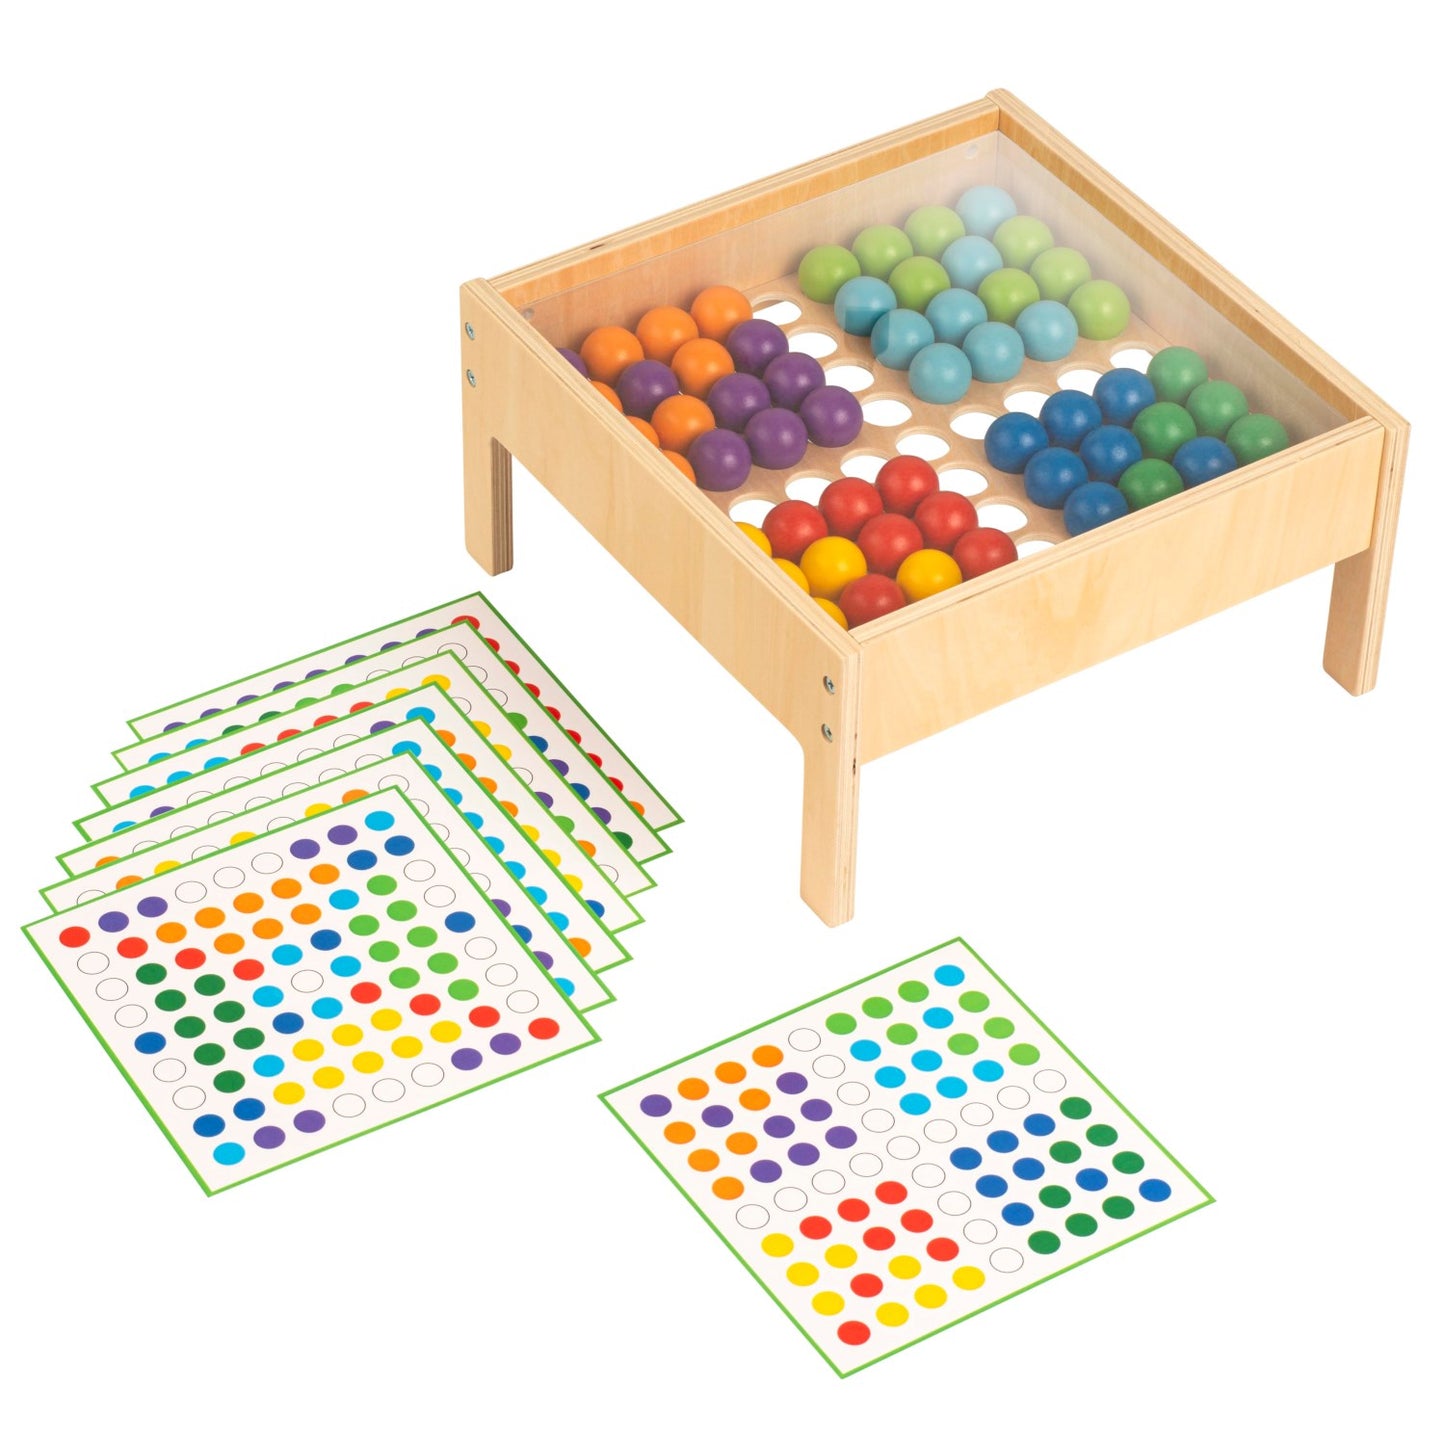 Mosaic table with coloured balls (NL)